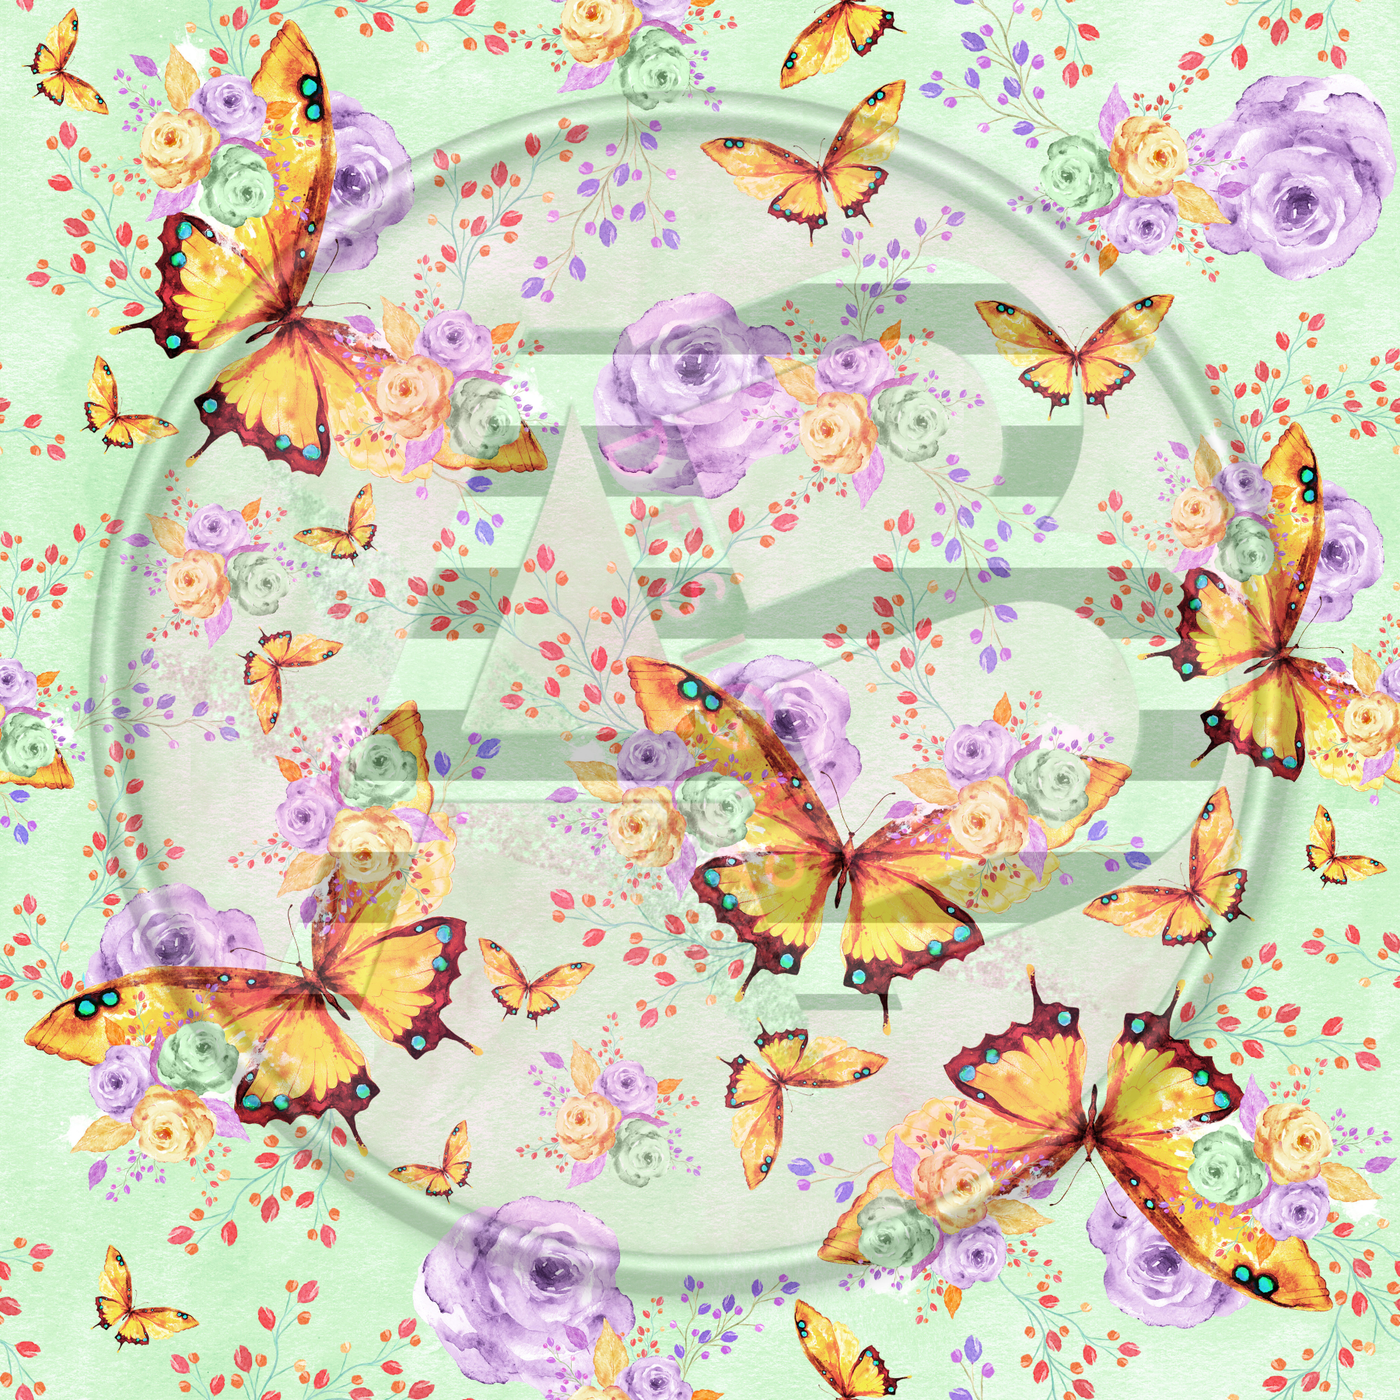 Adhesive Patterned Vinyl - Butterfly 12